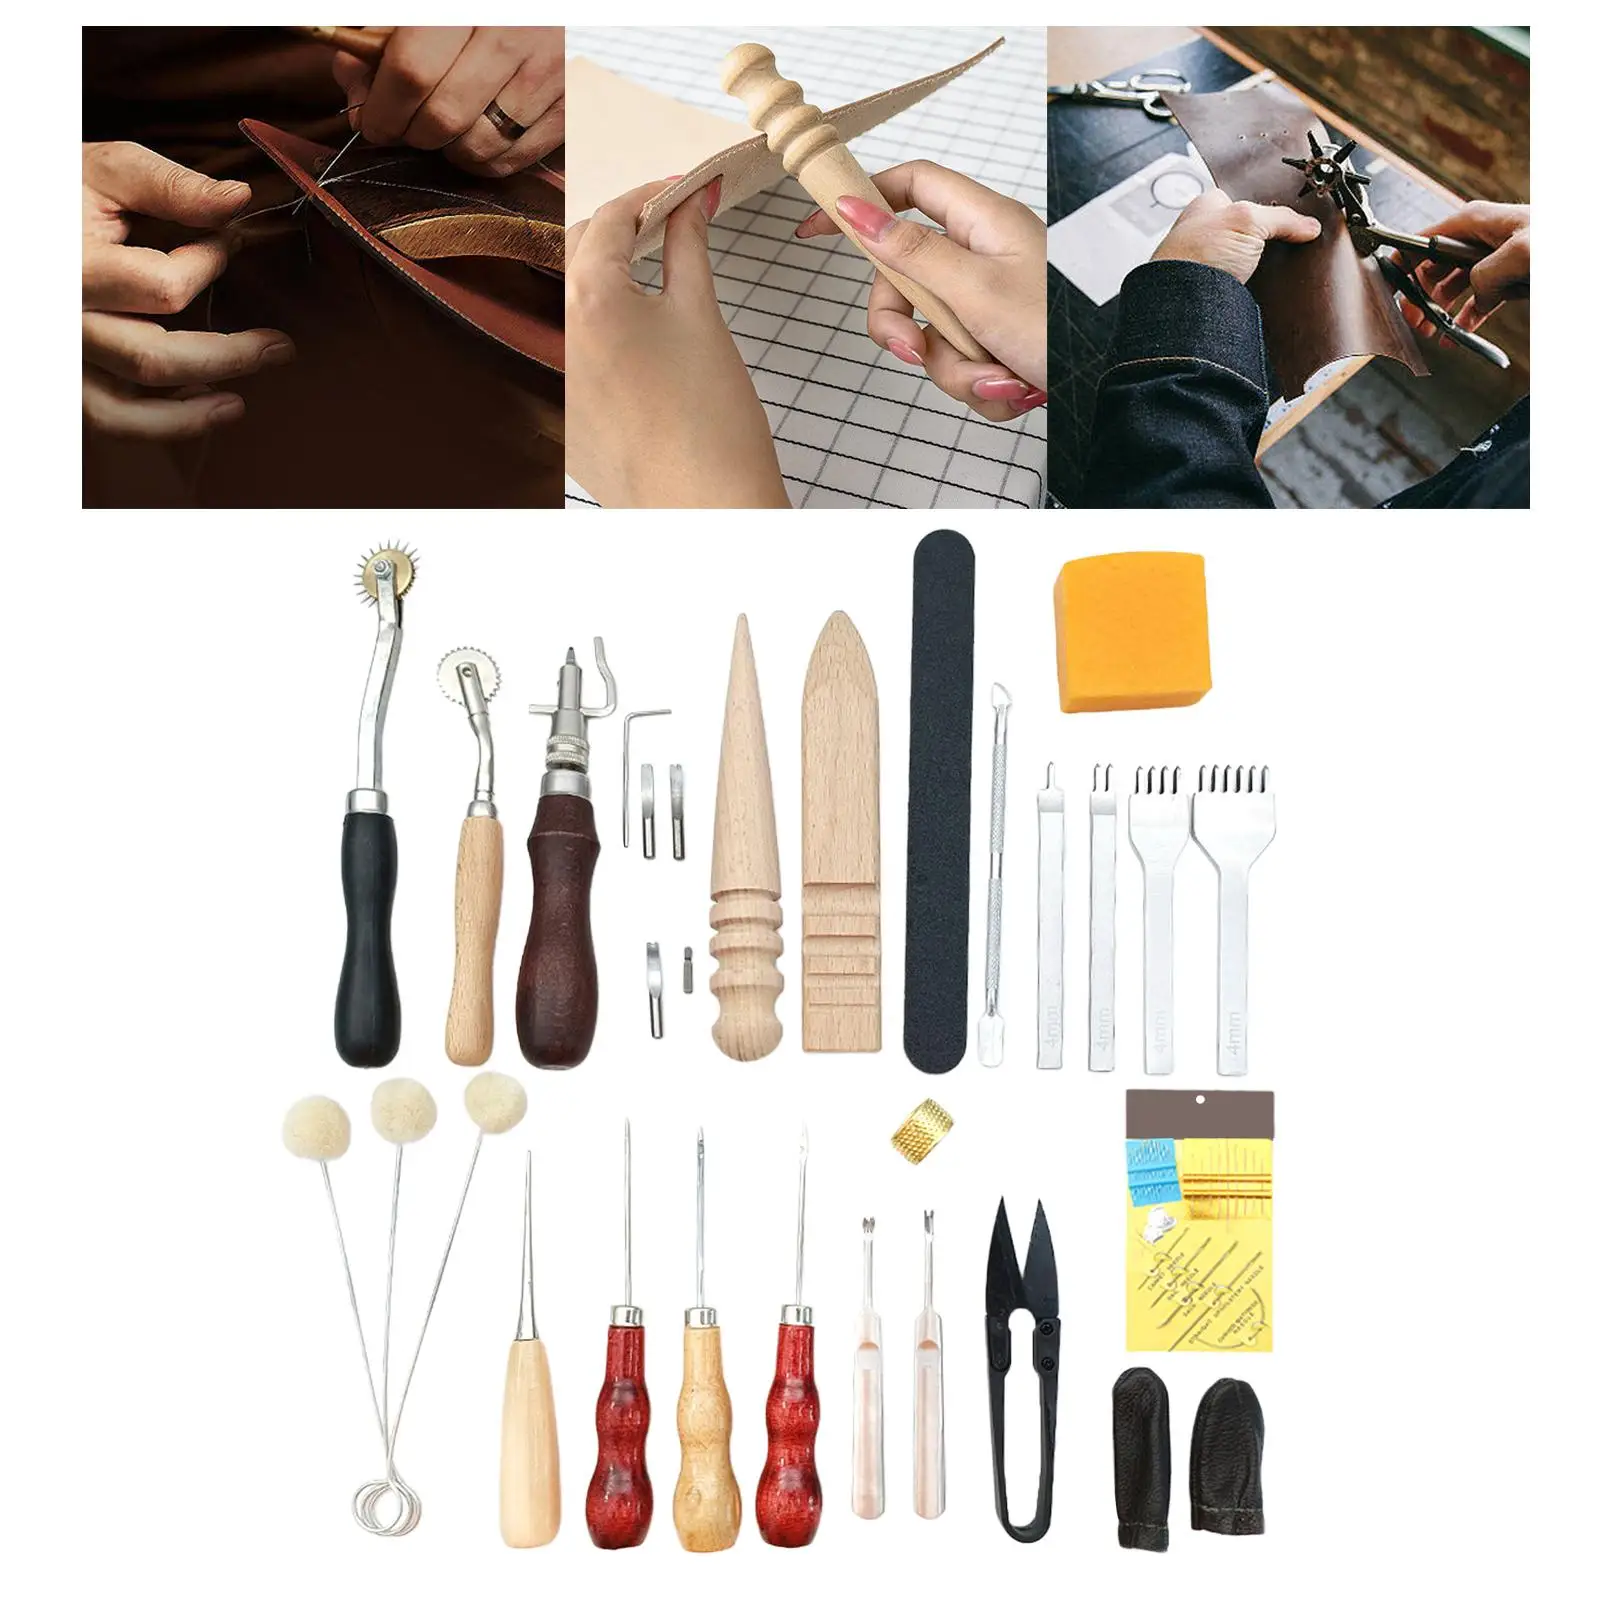 Leathercraft Tool Sets With Hand Sewing Stitching Punch Carving Tools And Other Leather Working Accessories